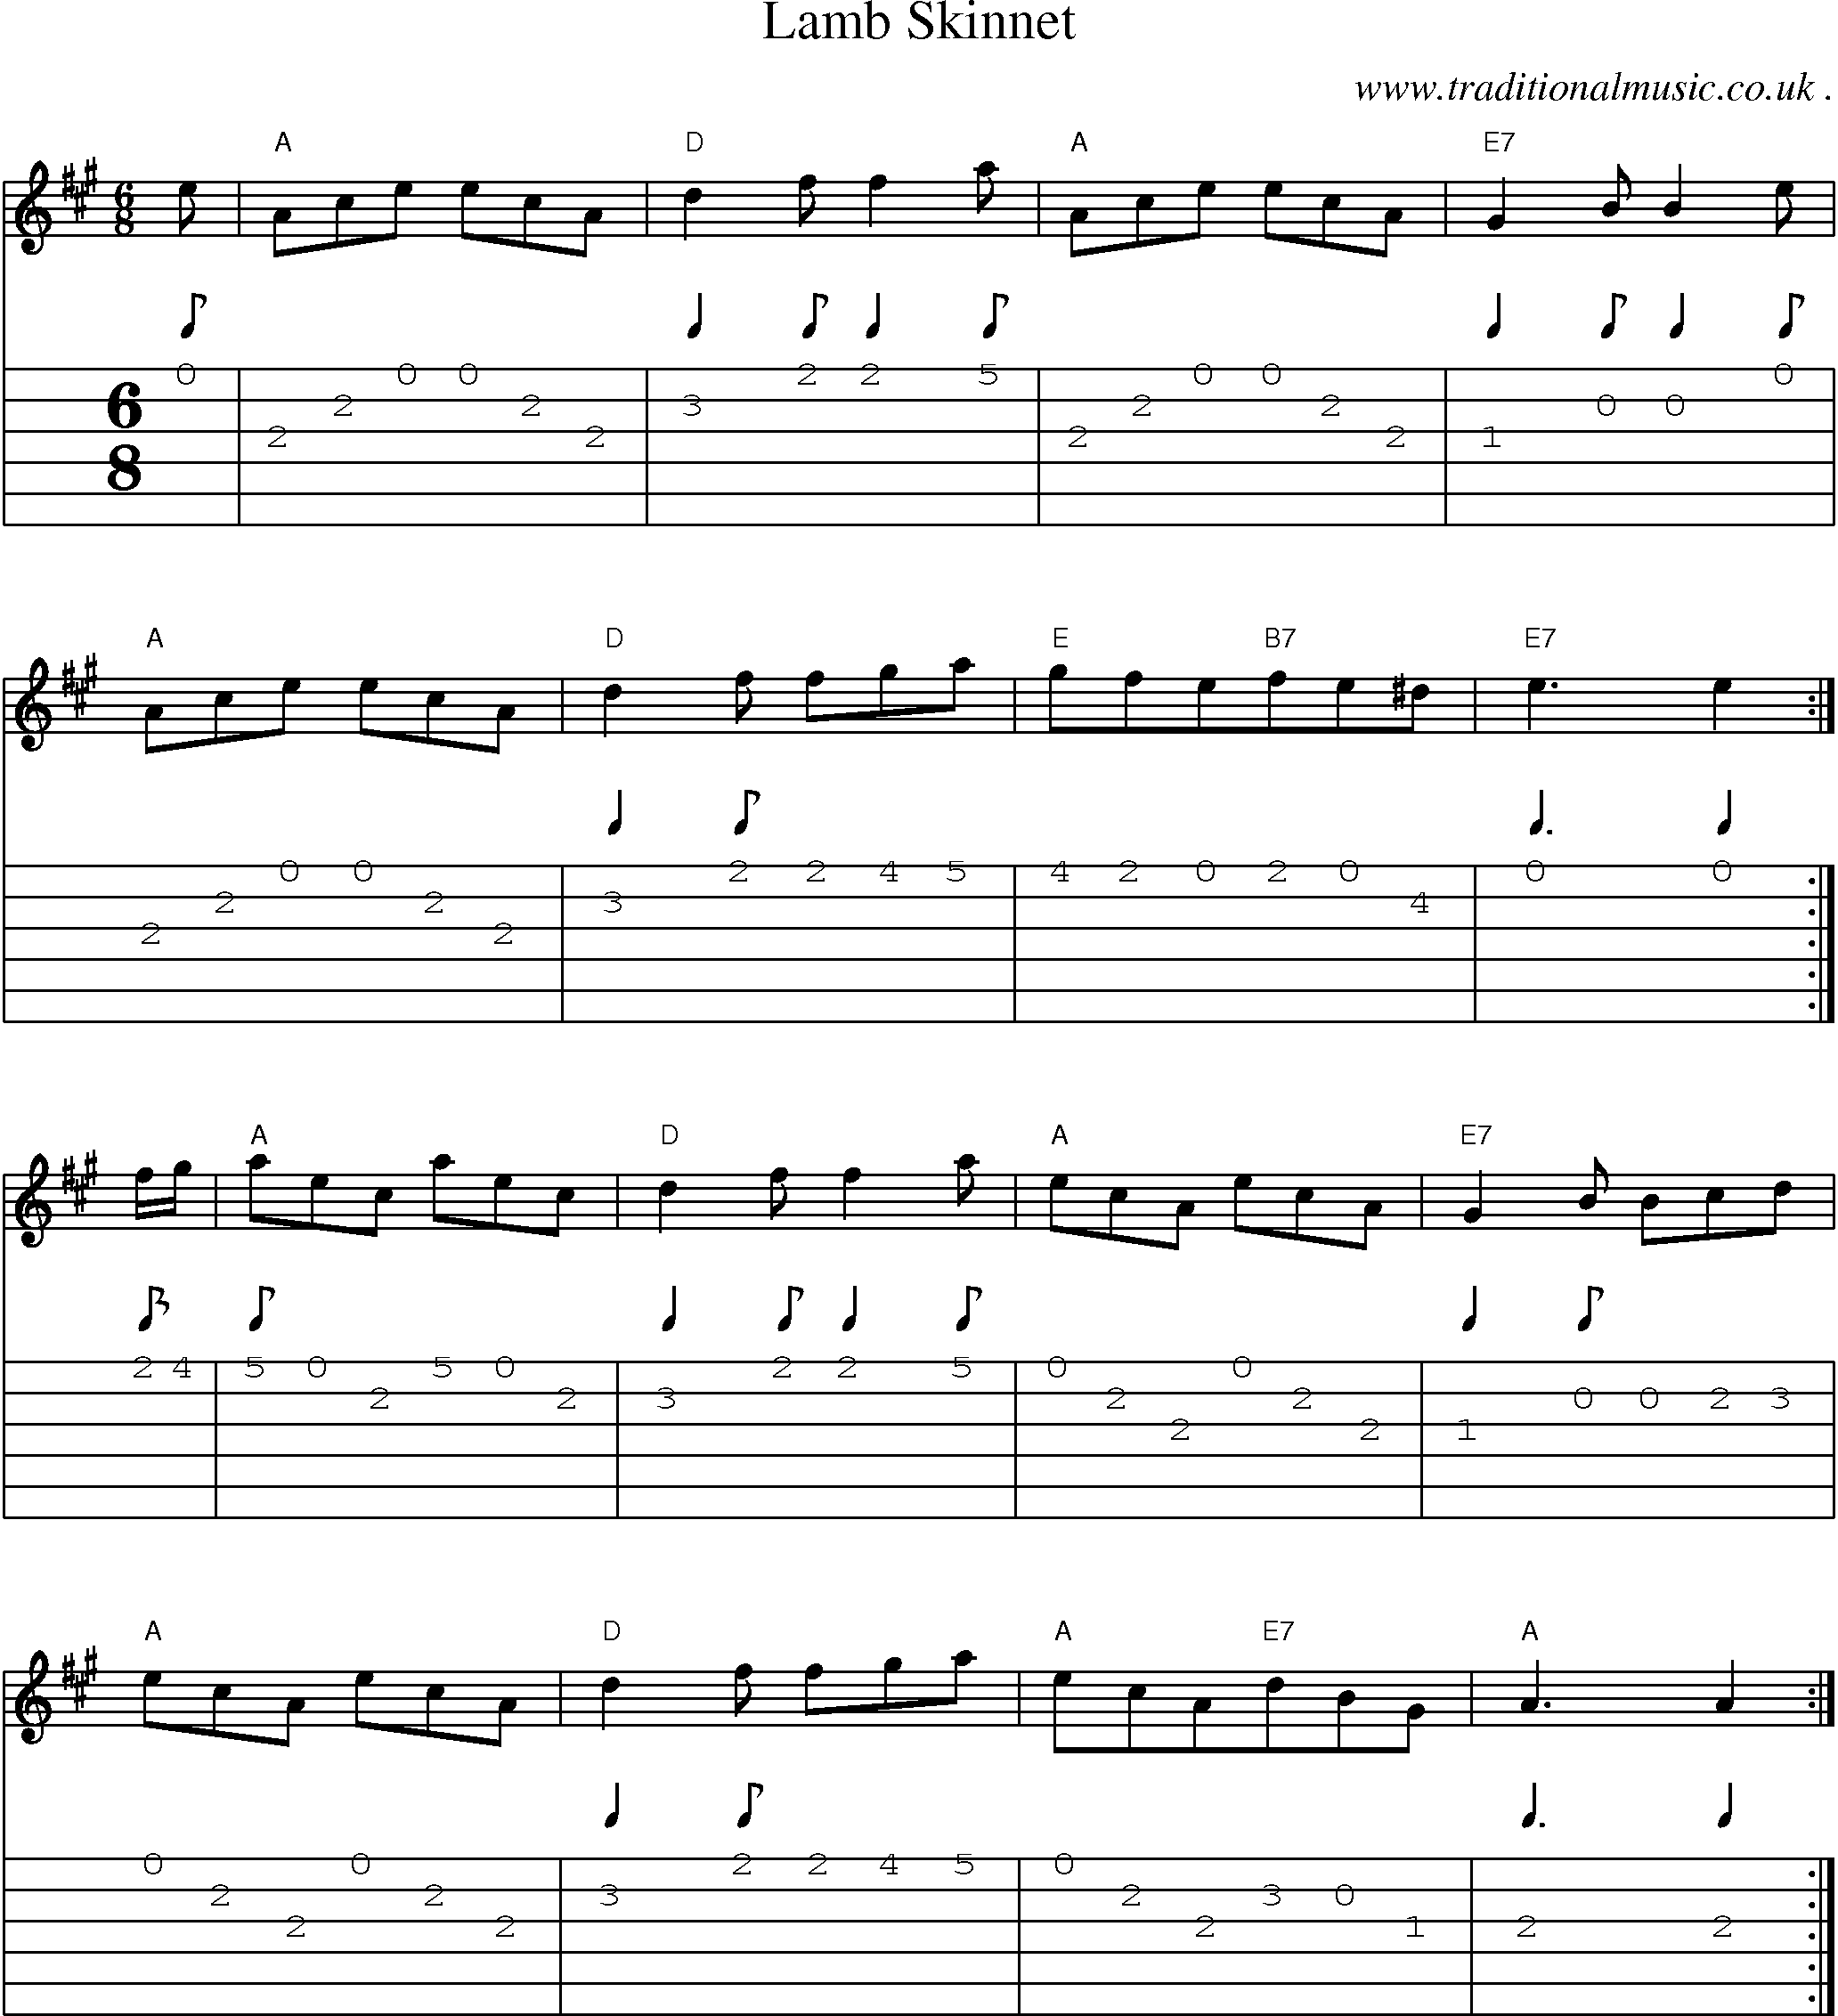 Sheet-Music and Guitar Tabs for Lamb Skinnet